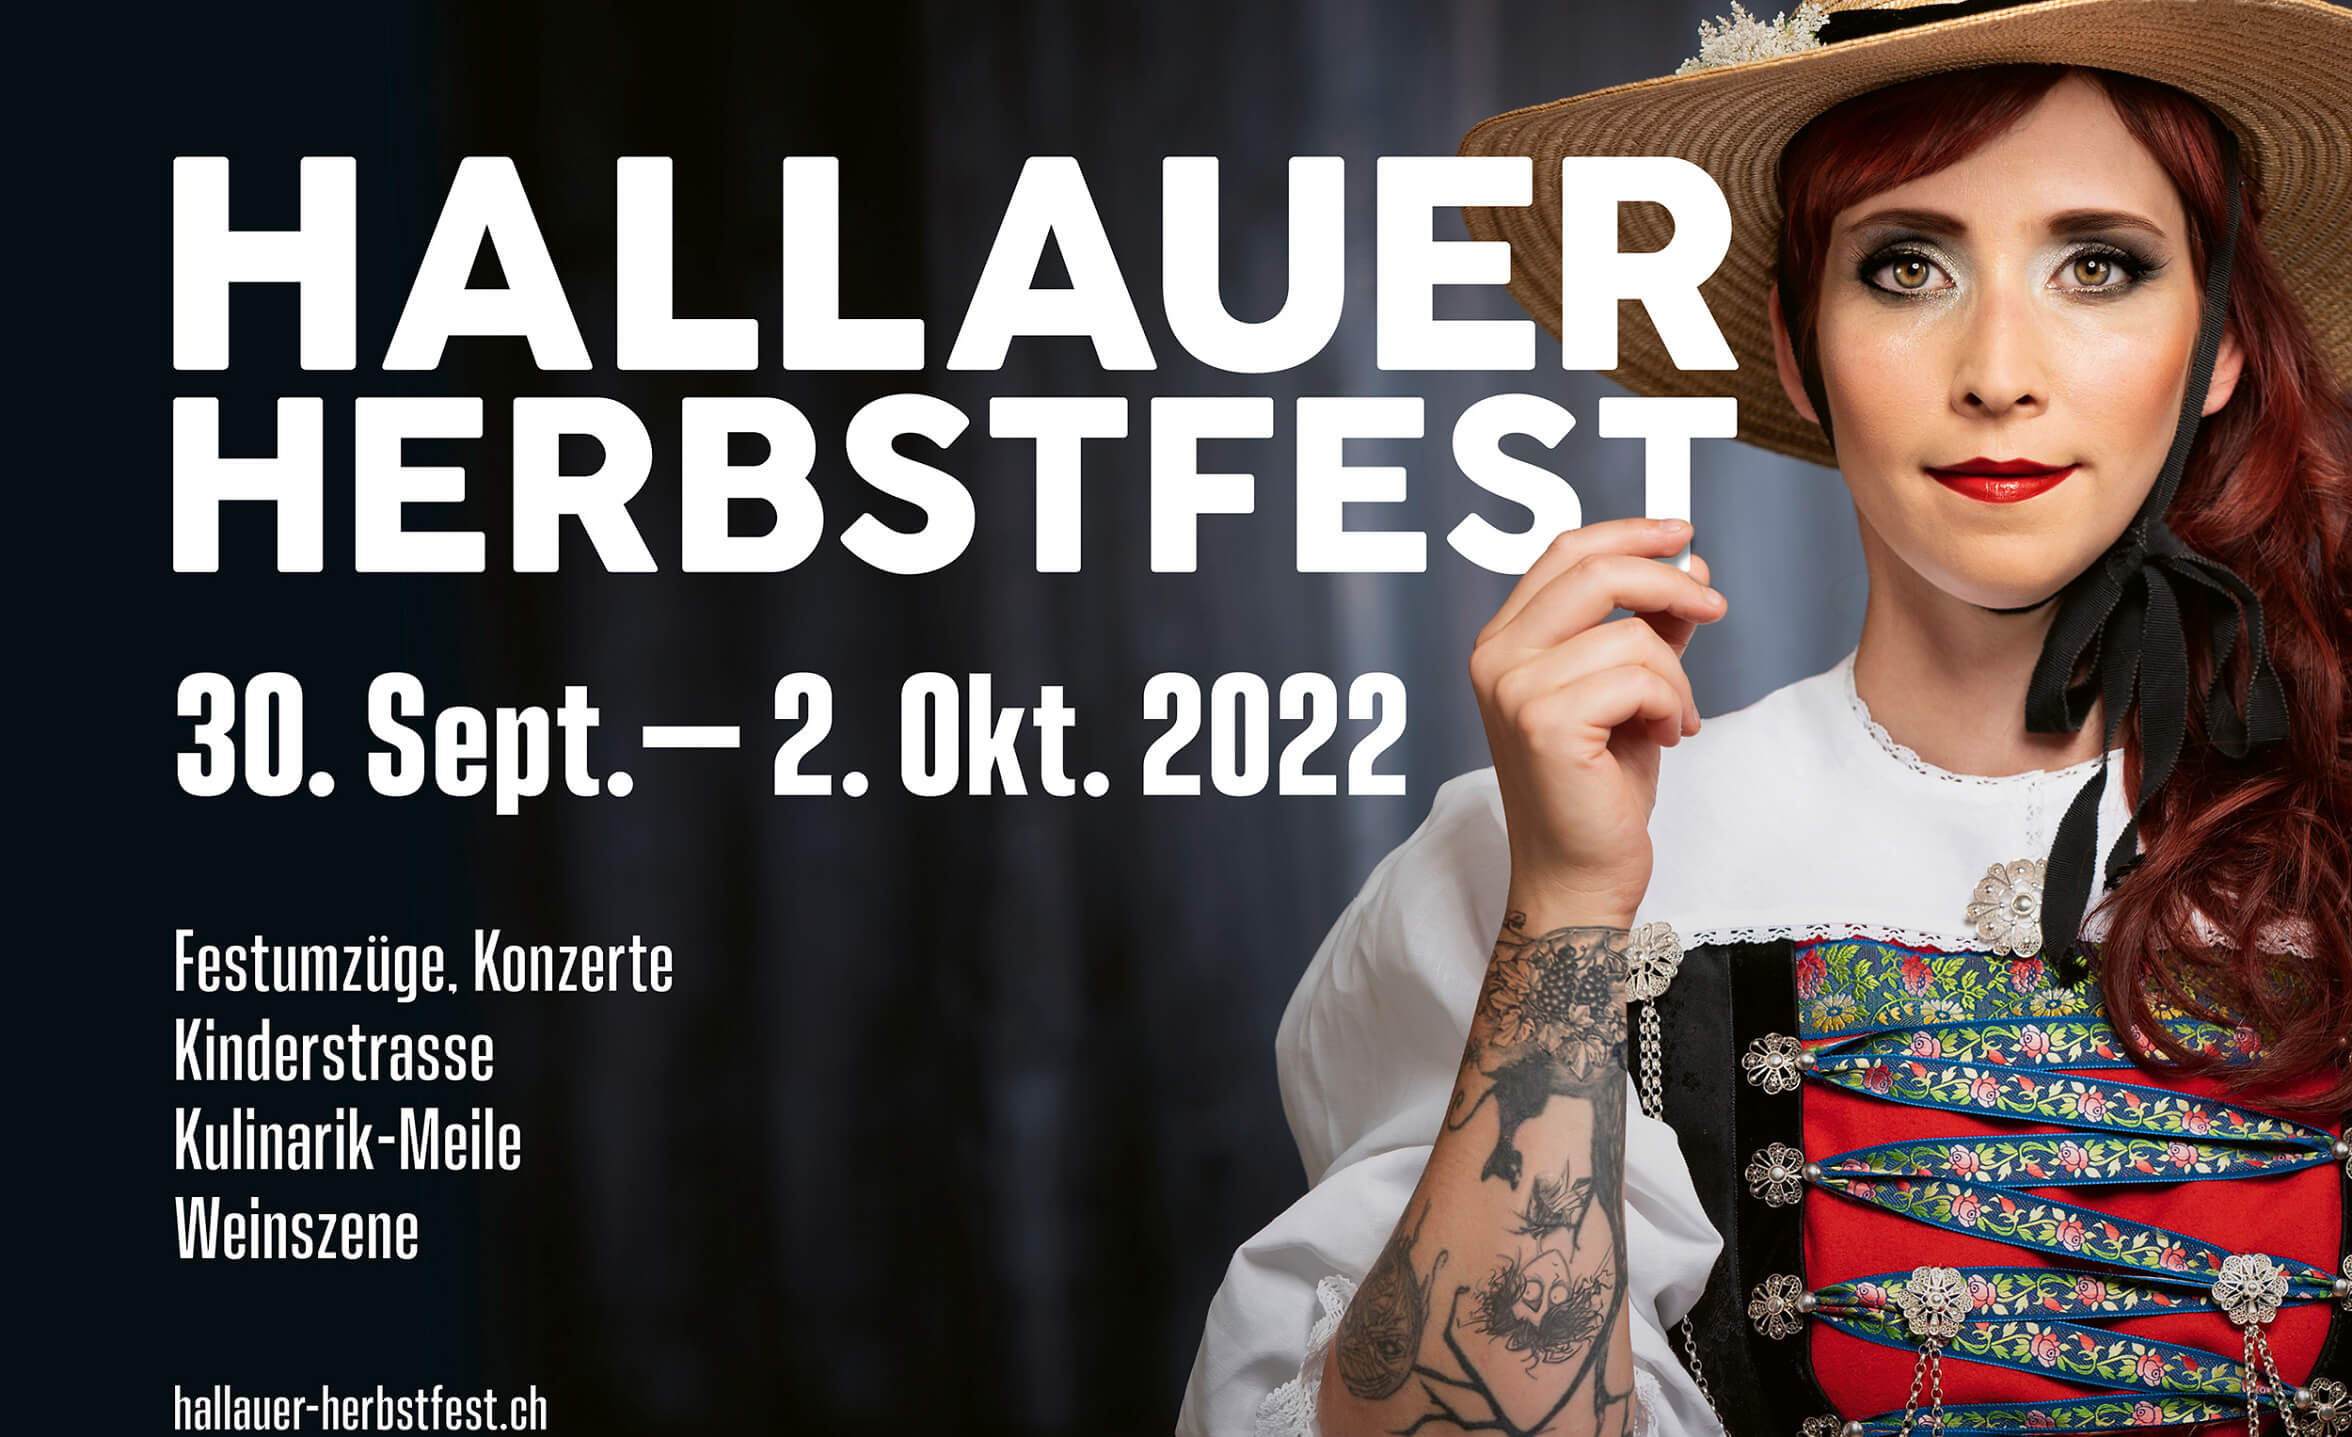 Event-Image for 'Hallauer Herbstfest'